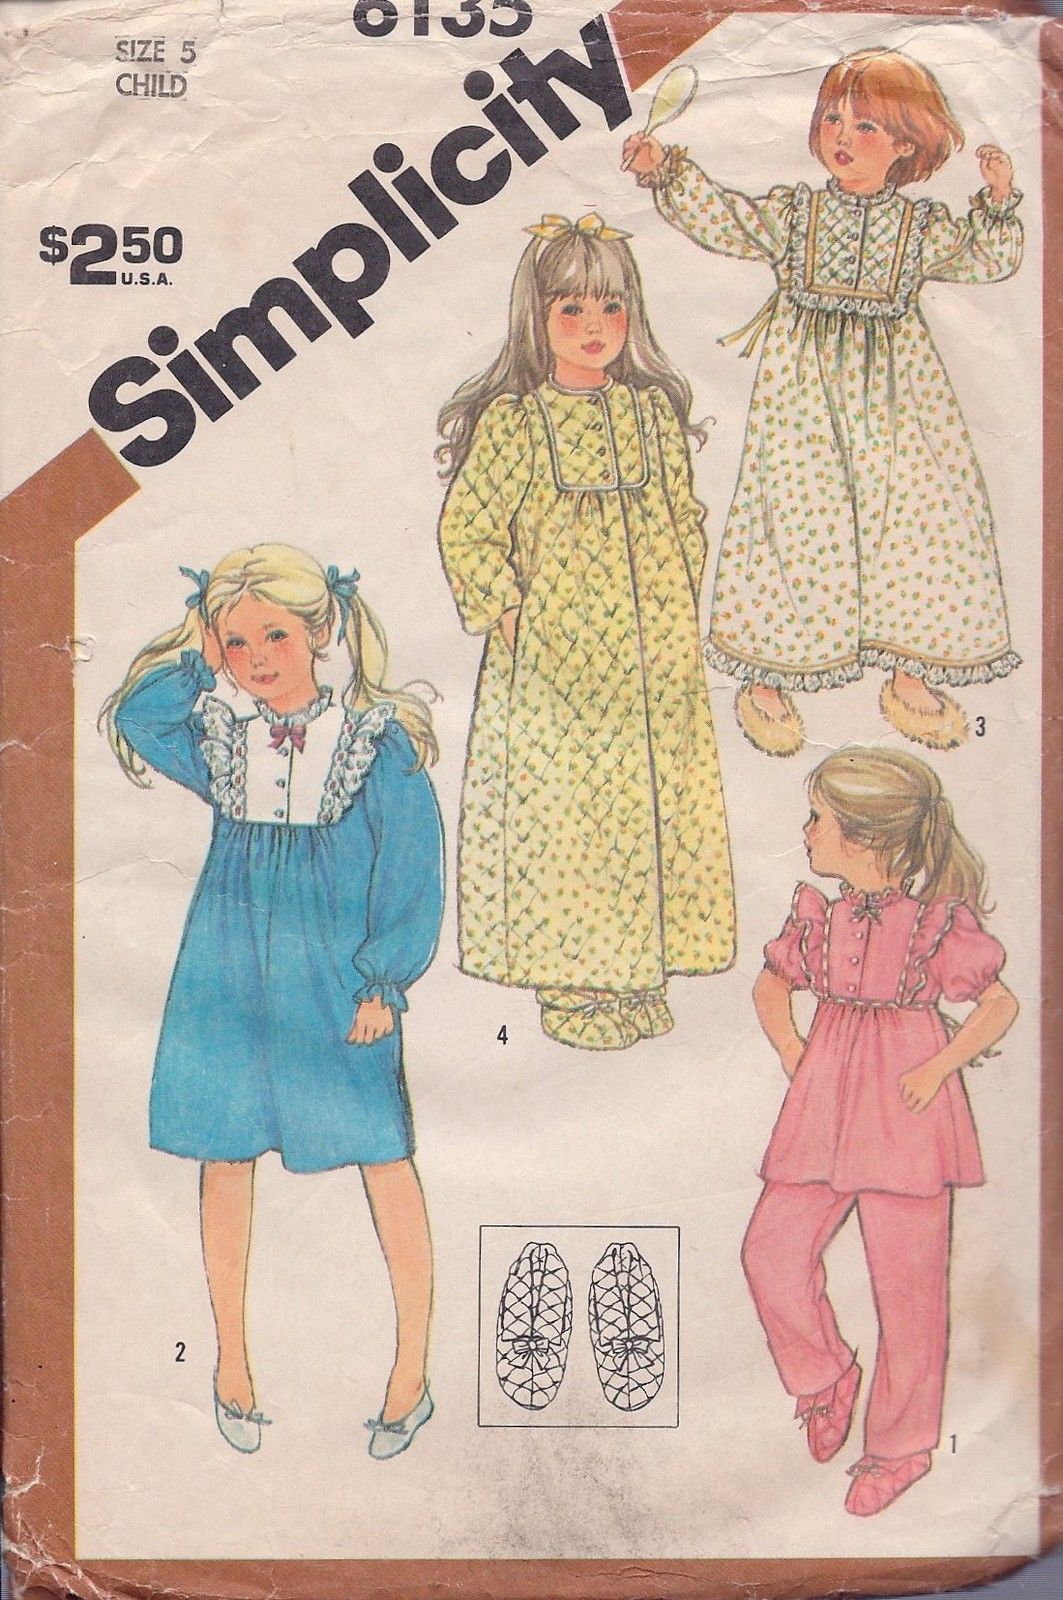 Simplicity 6135 Child's Pajamas, Nightgown in Two Lengths, Robe and Slippers - $2.00